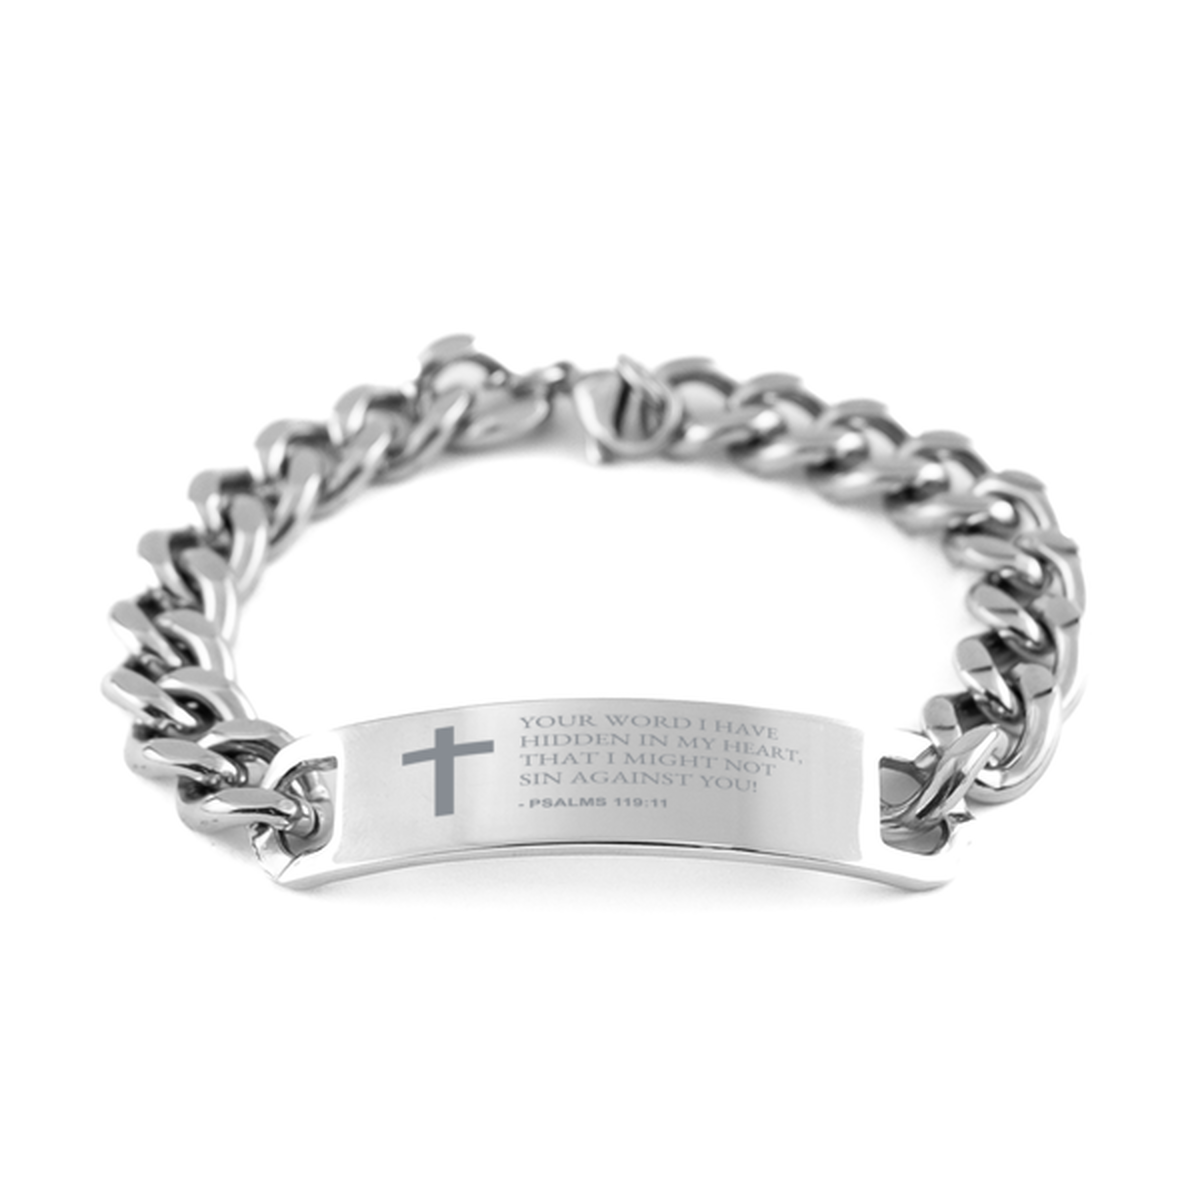 Bible Verse Chain Stainless Steel Bracelet, Psalms 119:11 Your Word I Have Hidden In My Heart, That I Might, Inspirational Christian Gifts For Men Women